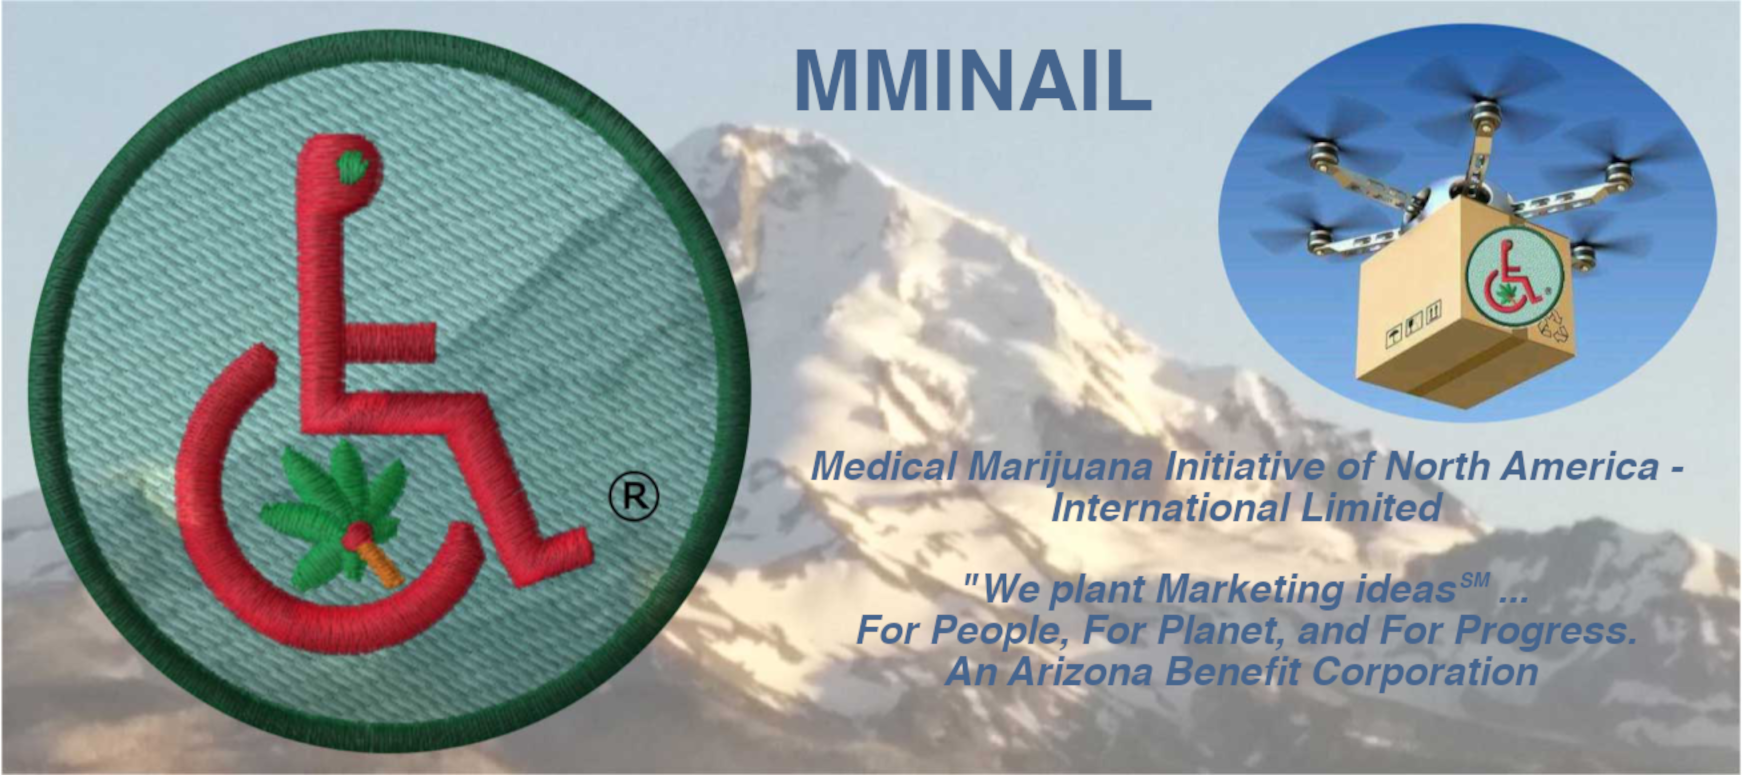 The USPTO Registered Logo Badge of the Medical Marijuana Initiative of North America - International Limited, an Arizona Benefit Corporation to the left of Mt Hood sunlit from the northwest in June followed by the proprietary MMINAIL octocopter delivery bot.